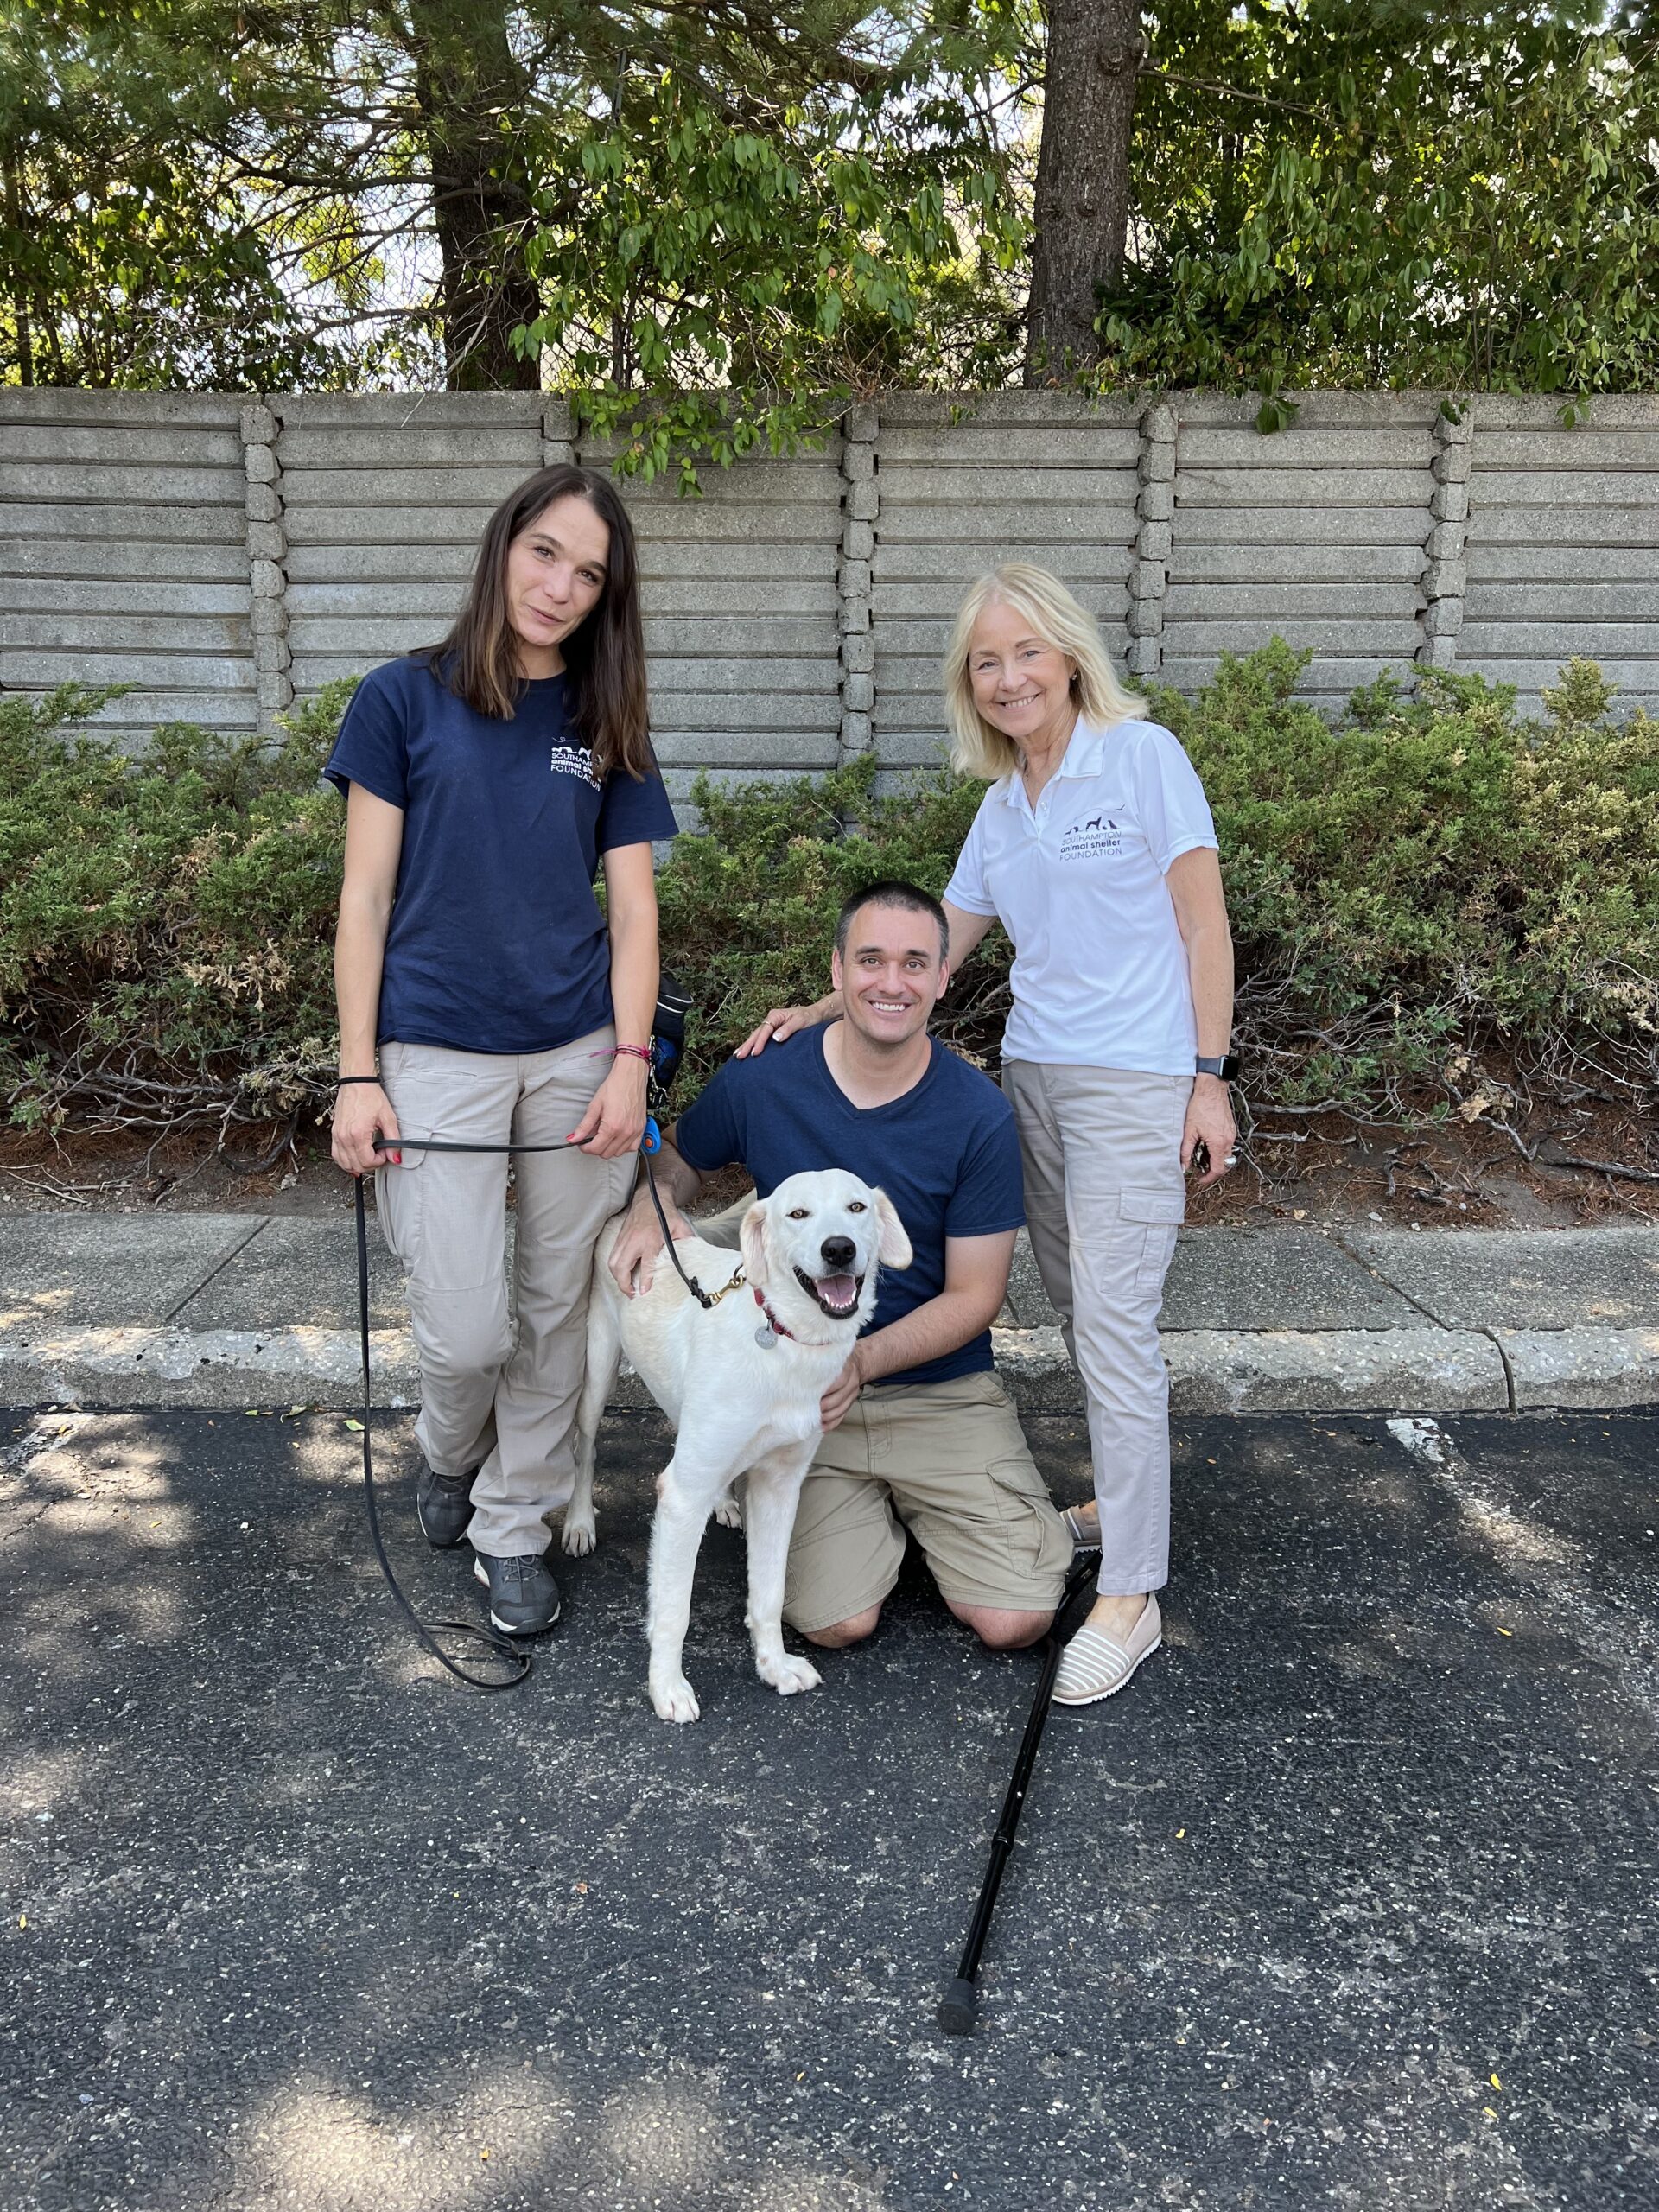 From left, SASF Director of Training Weronica Grzybowska, NYPD officer Thomas Cannariato with his dog, Zelda, and SASF Executive Director Pat Deshong. Zelda is one of the shelter foundation dogs trained to be a companion for military veterans and first responders as part of a new program, in partnership with Operation Warrior Shield.